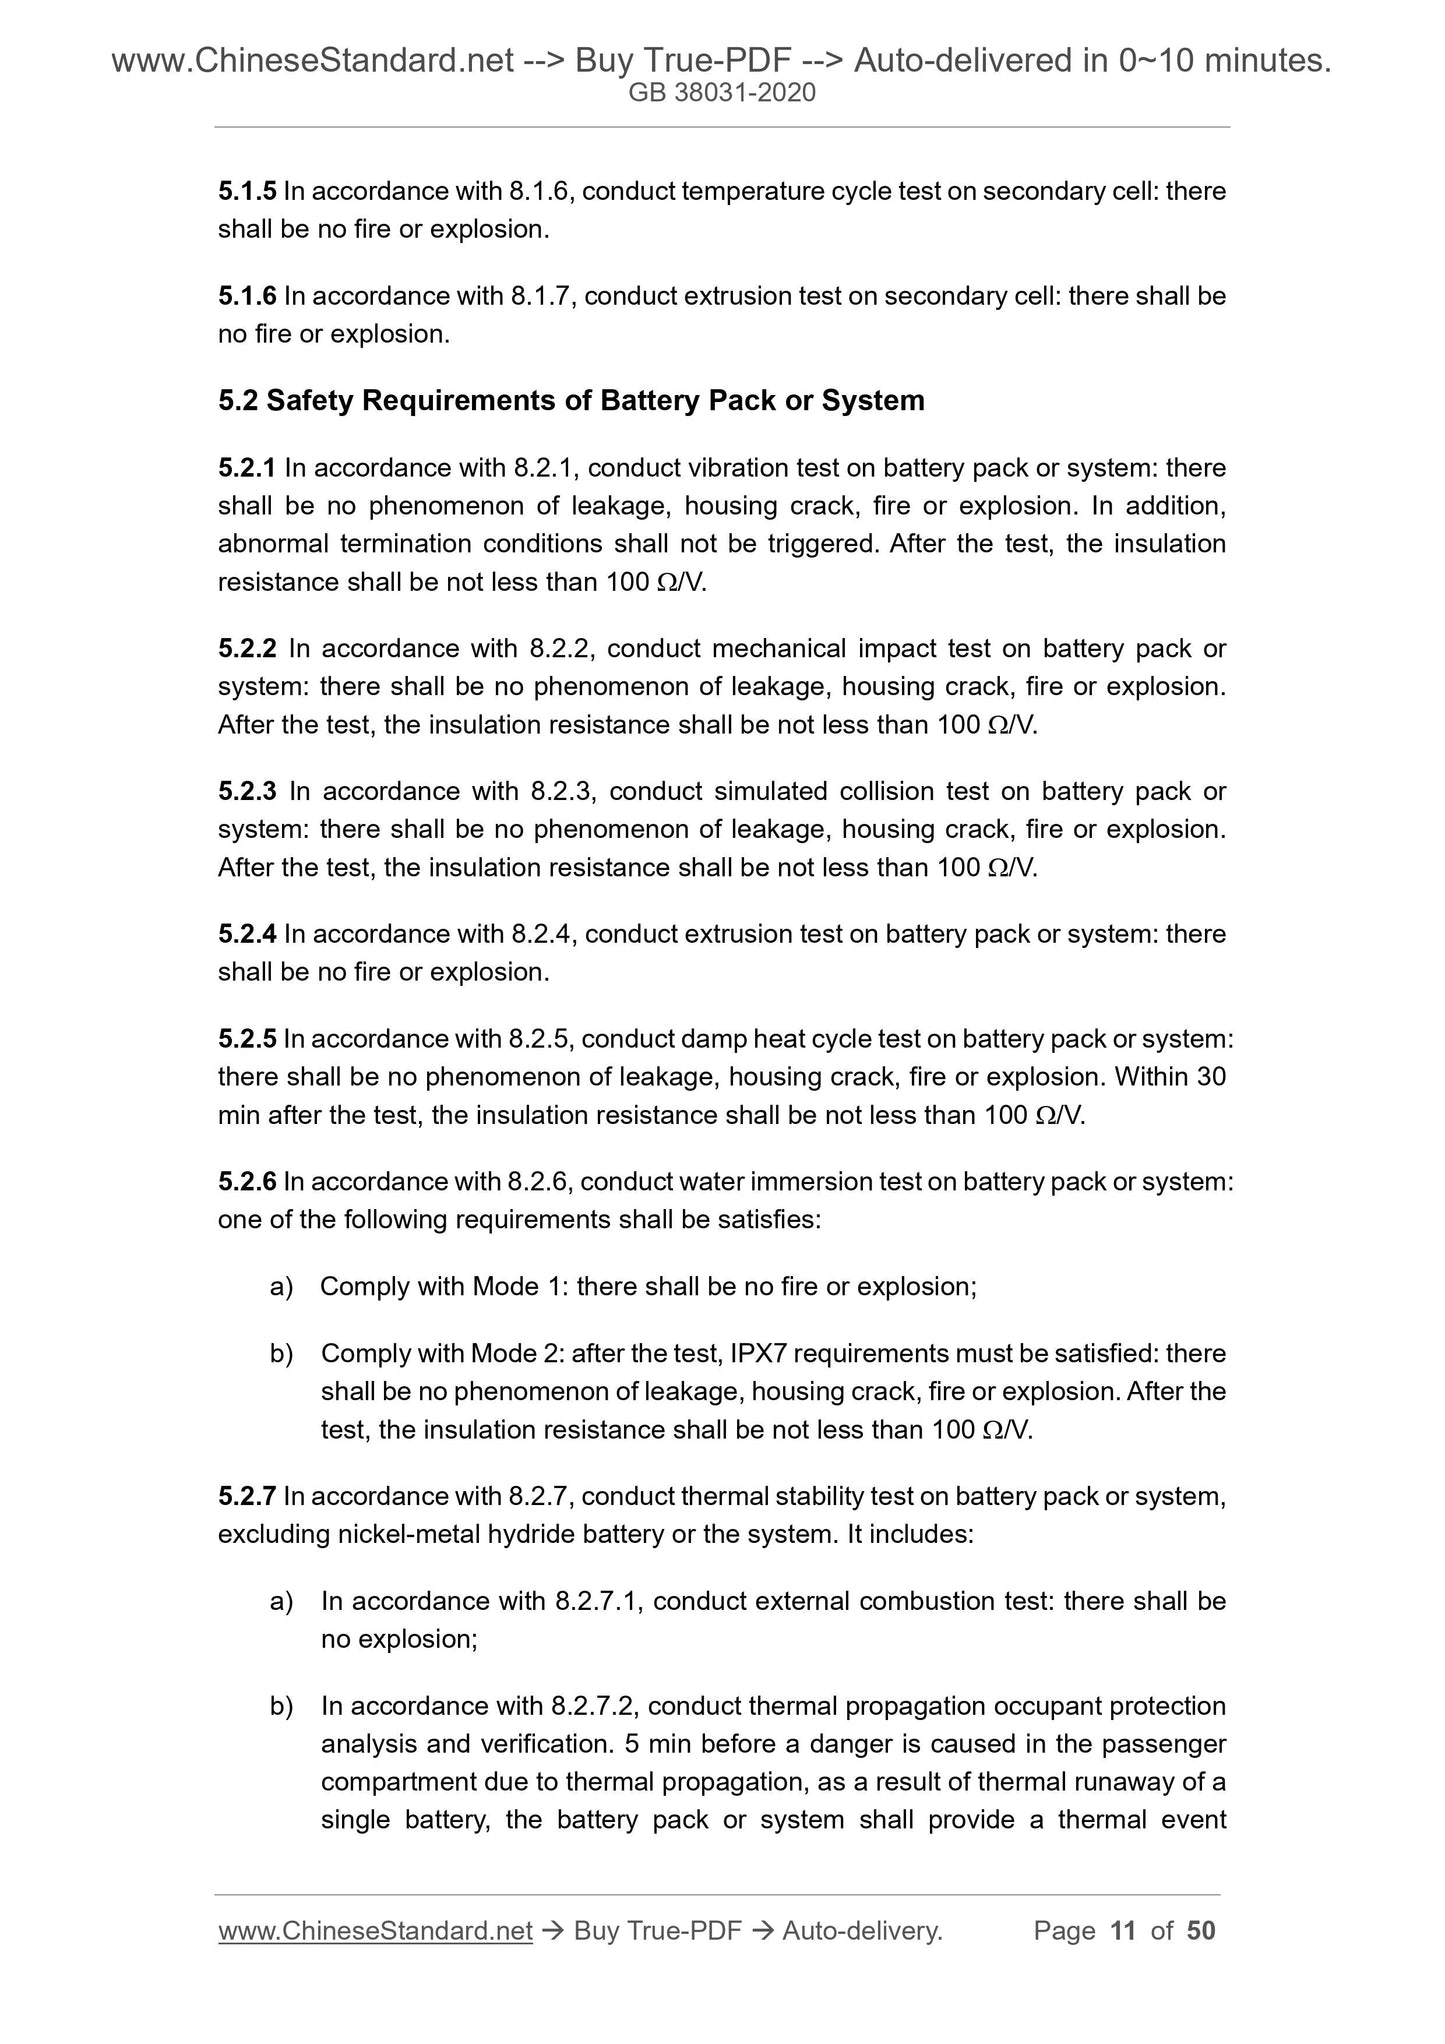 GB 38031-2020 Page 5